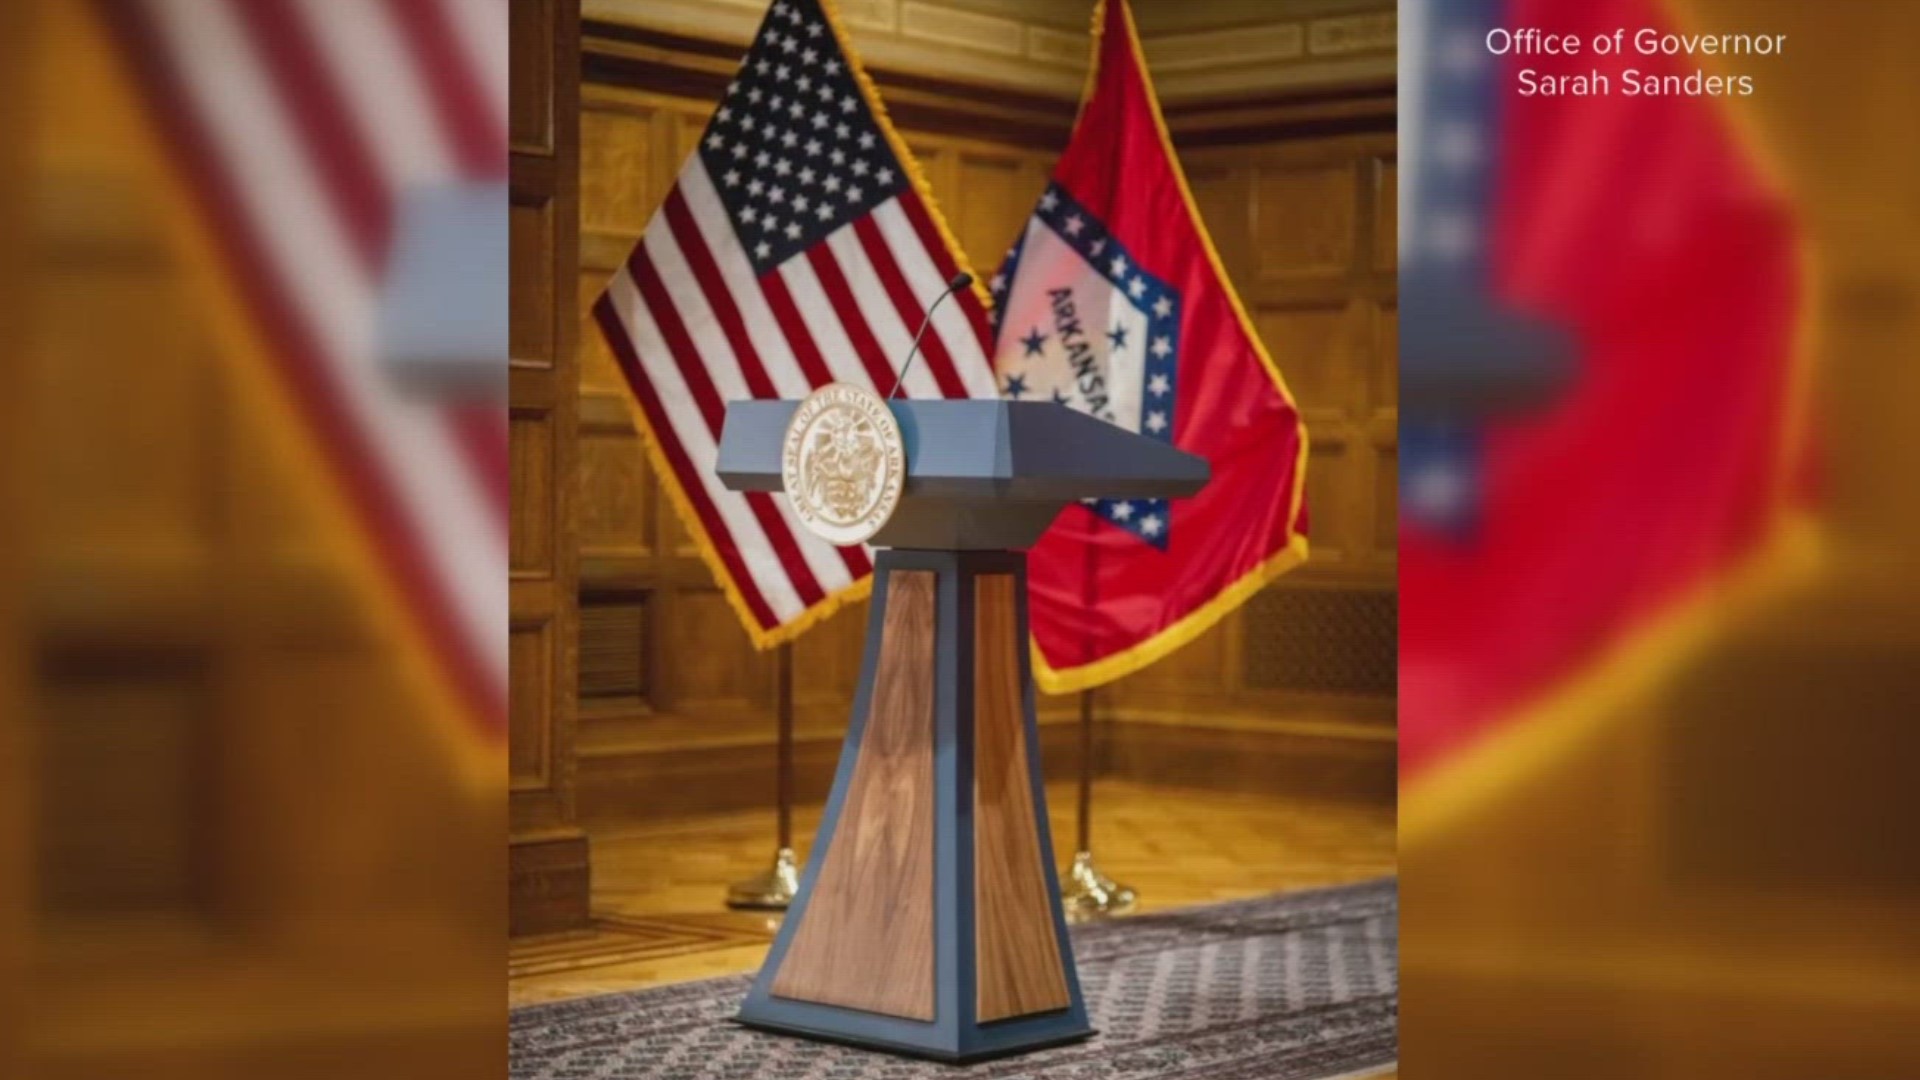 We're getting our first look at a picture sent by the Gov. Sarah Huckabee Sanders' office of an alleged $19,000 lectern purchased.